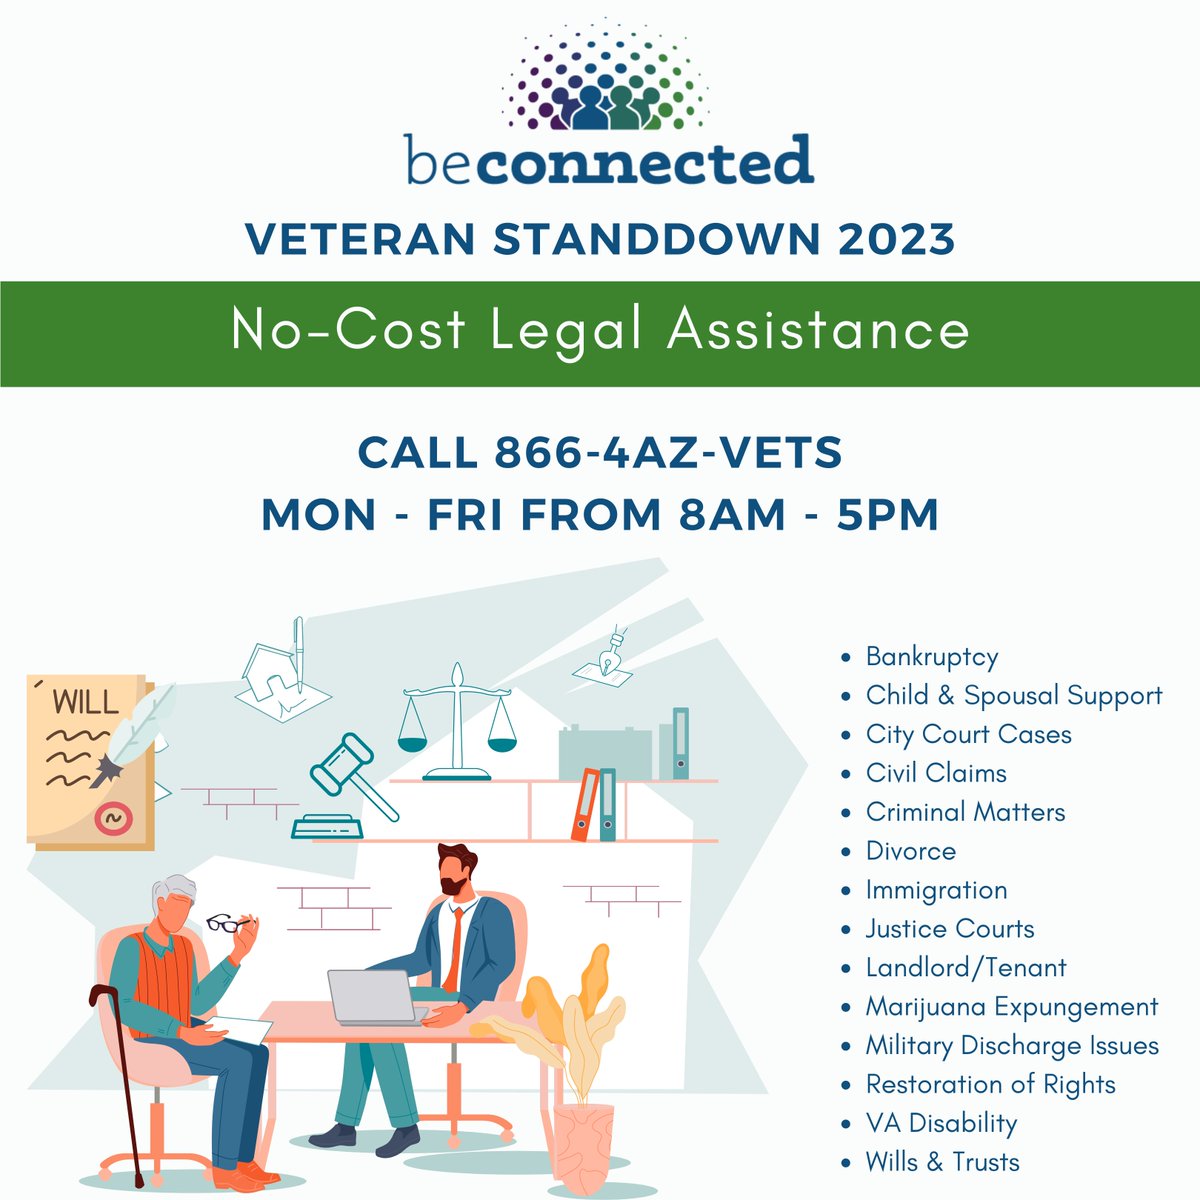 No-cost legal📎assistance is available now through 4/21 for service members, veterans & their family members. To start the process, call 📞 866-429-8387 Mon-Fri 8 AM-5 PM and ask for a legal screening. 

⚖️ #LegalHelp #BeConnected #VeteranStandDown #MaricopaCounty #Veterans